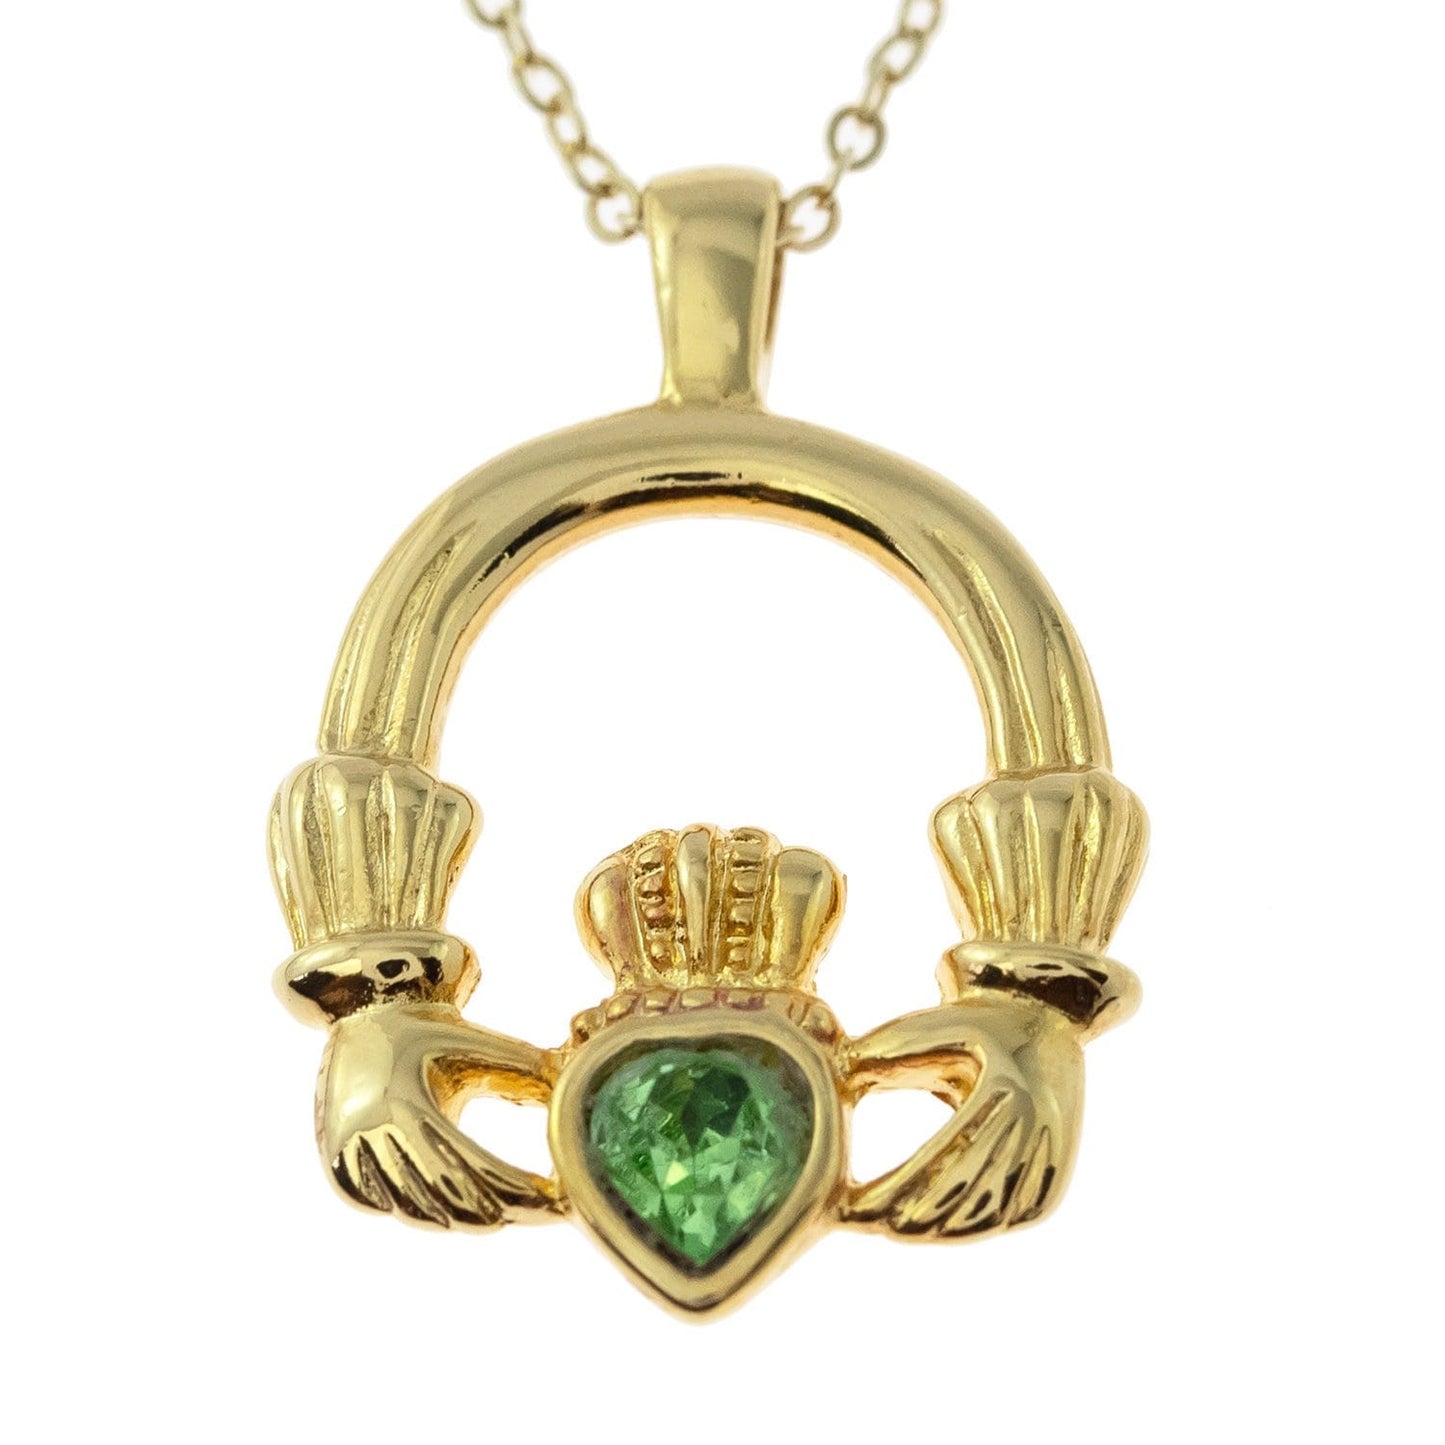 Vintage Claddagh Necklace Peridot Swarovski Heart Crystal Antique 18k Gold Made in the USA N1722